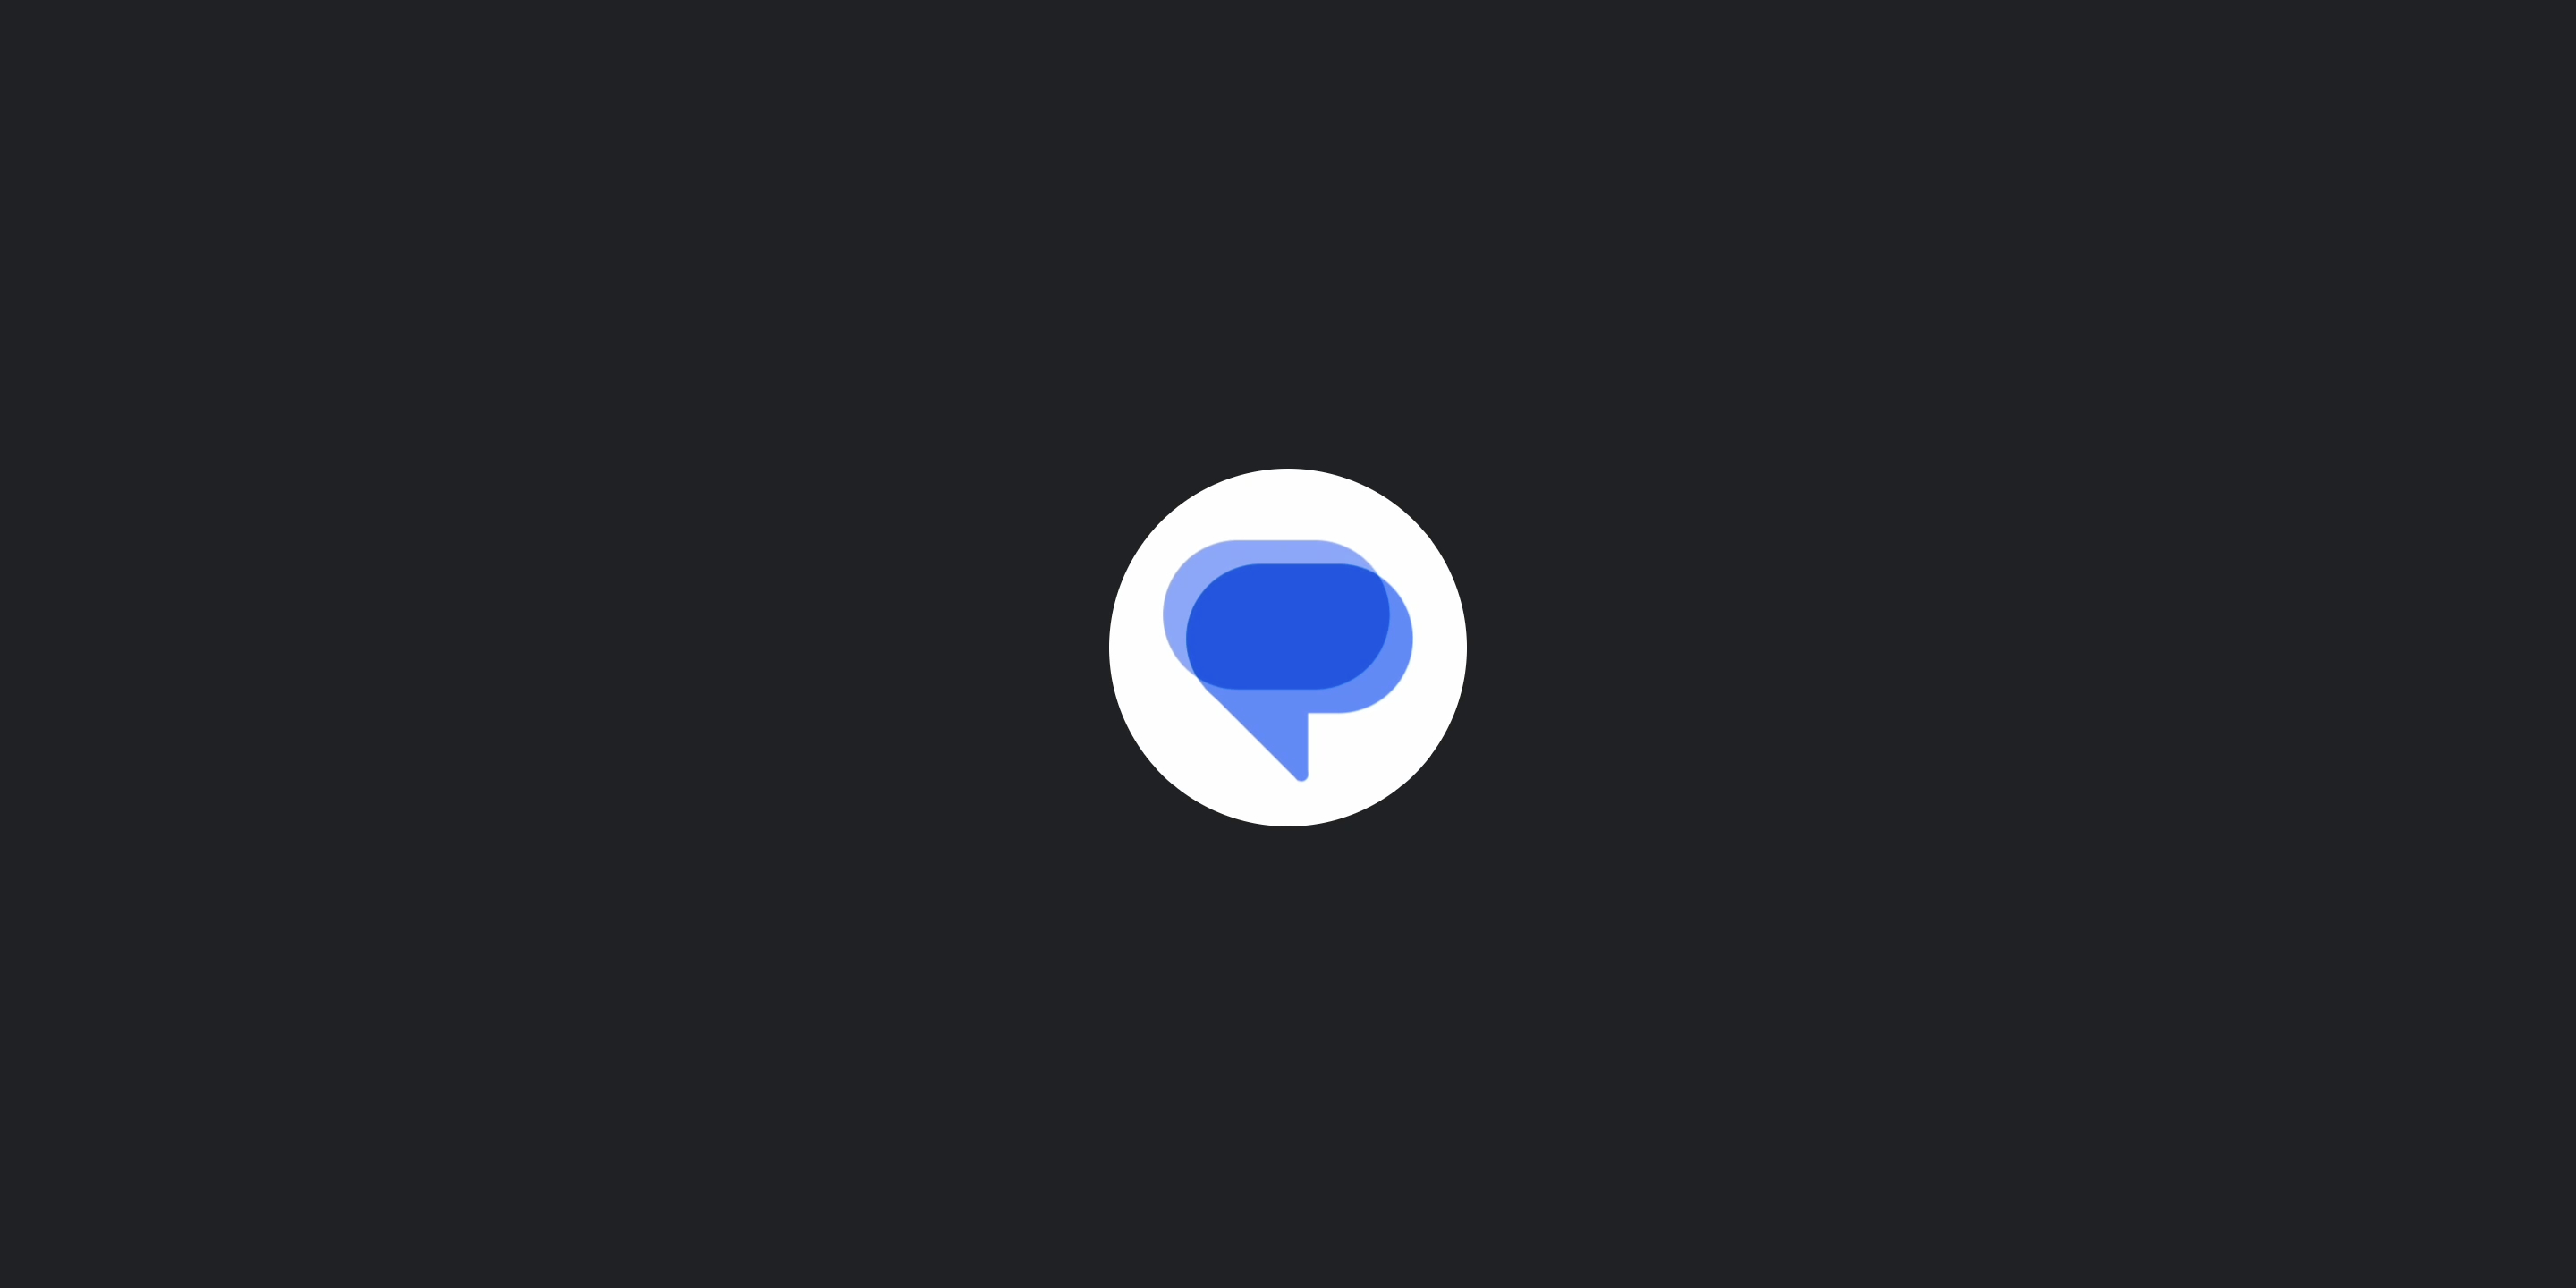 New Google Messages icon gets animated splash screen on web